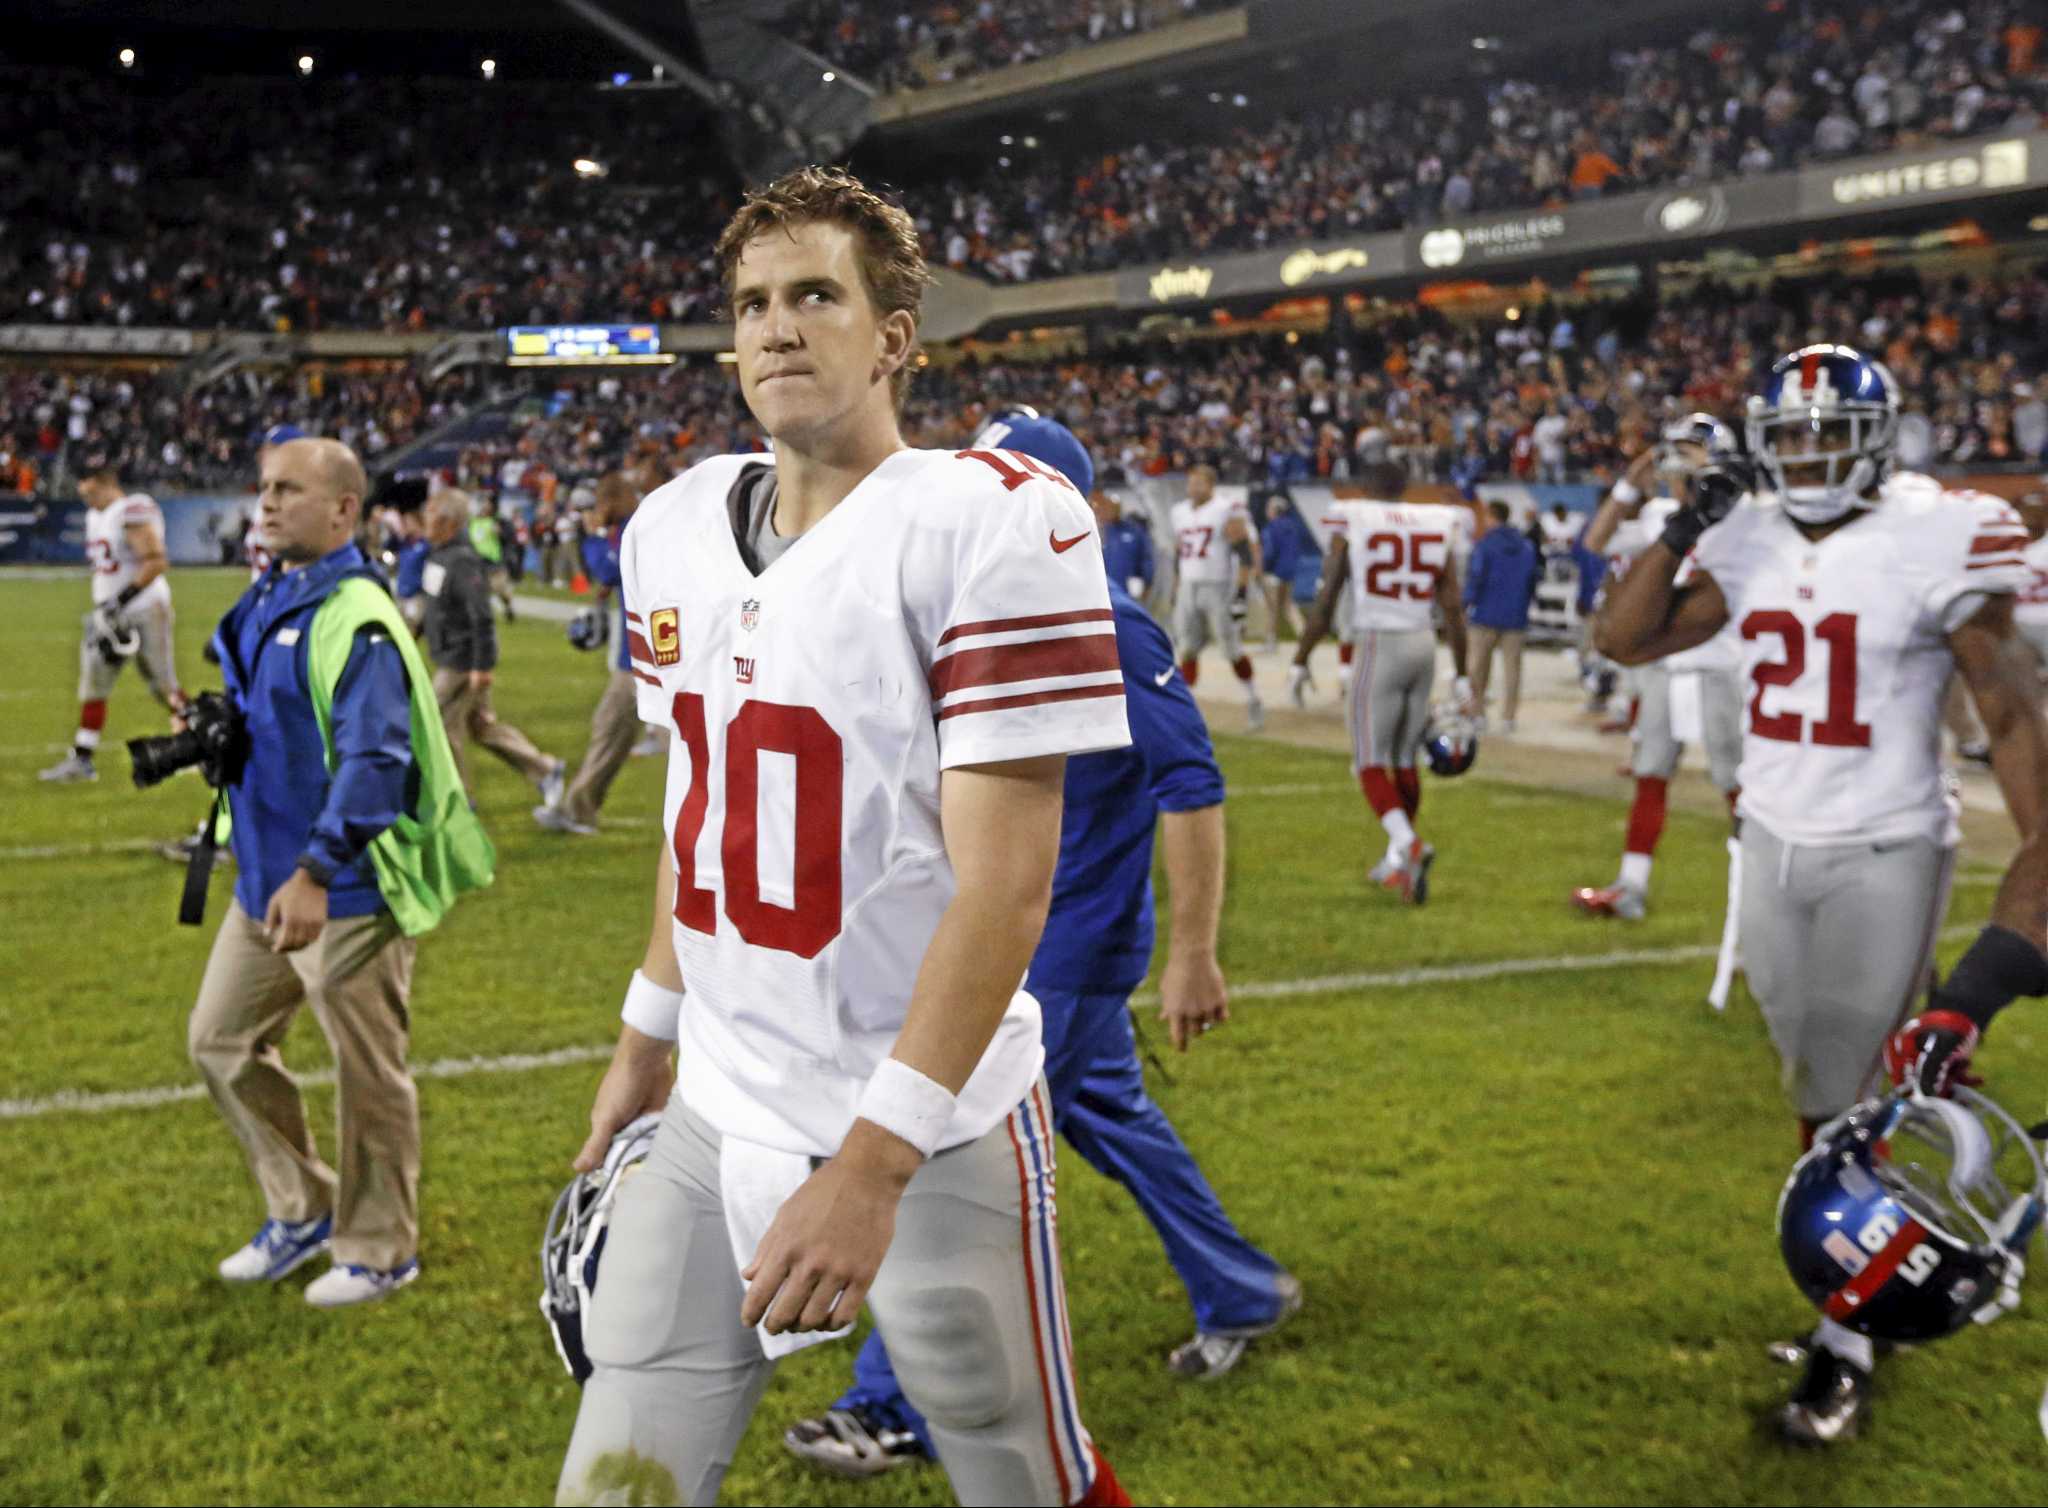 As Giants retire Eli Manning's jersey, you wonder: Is this the way